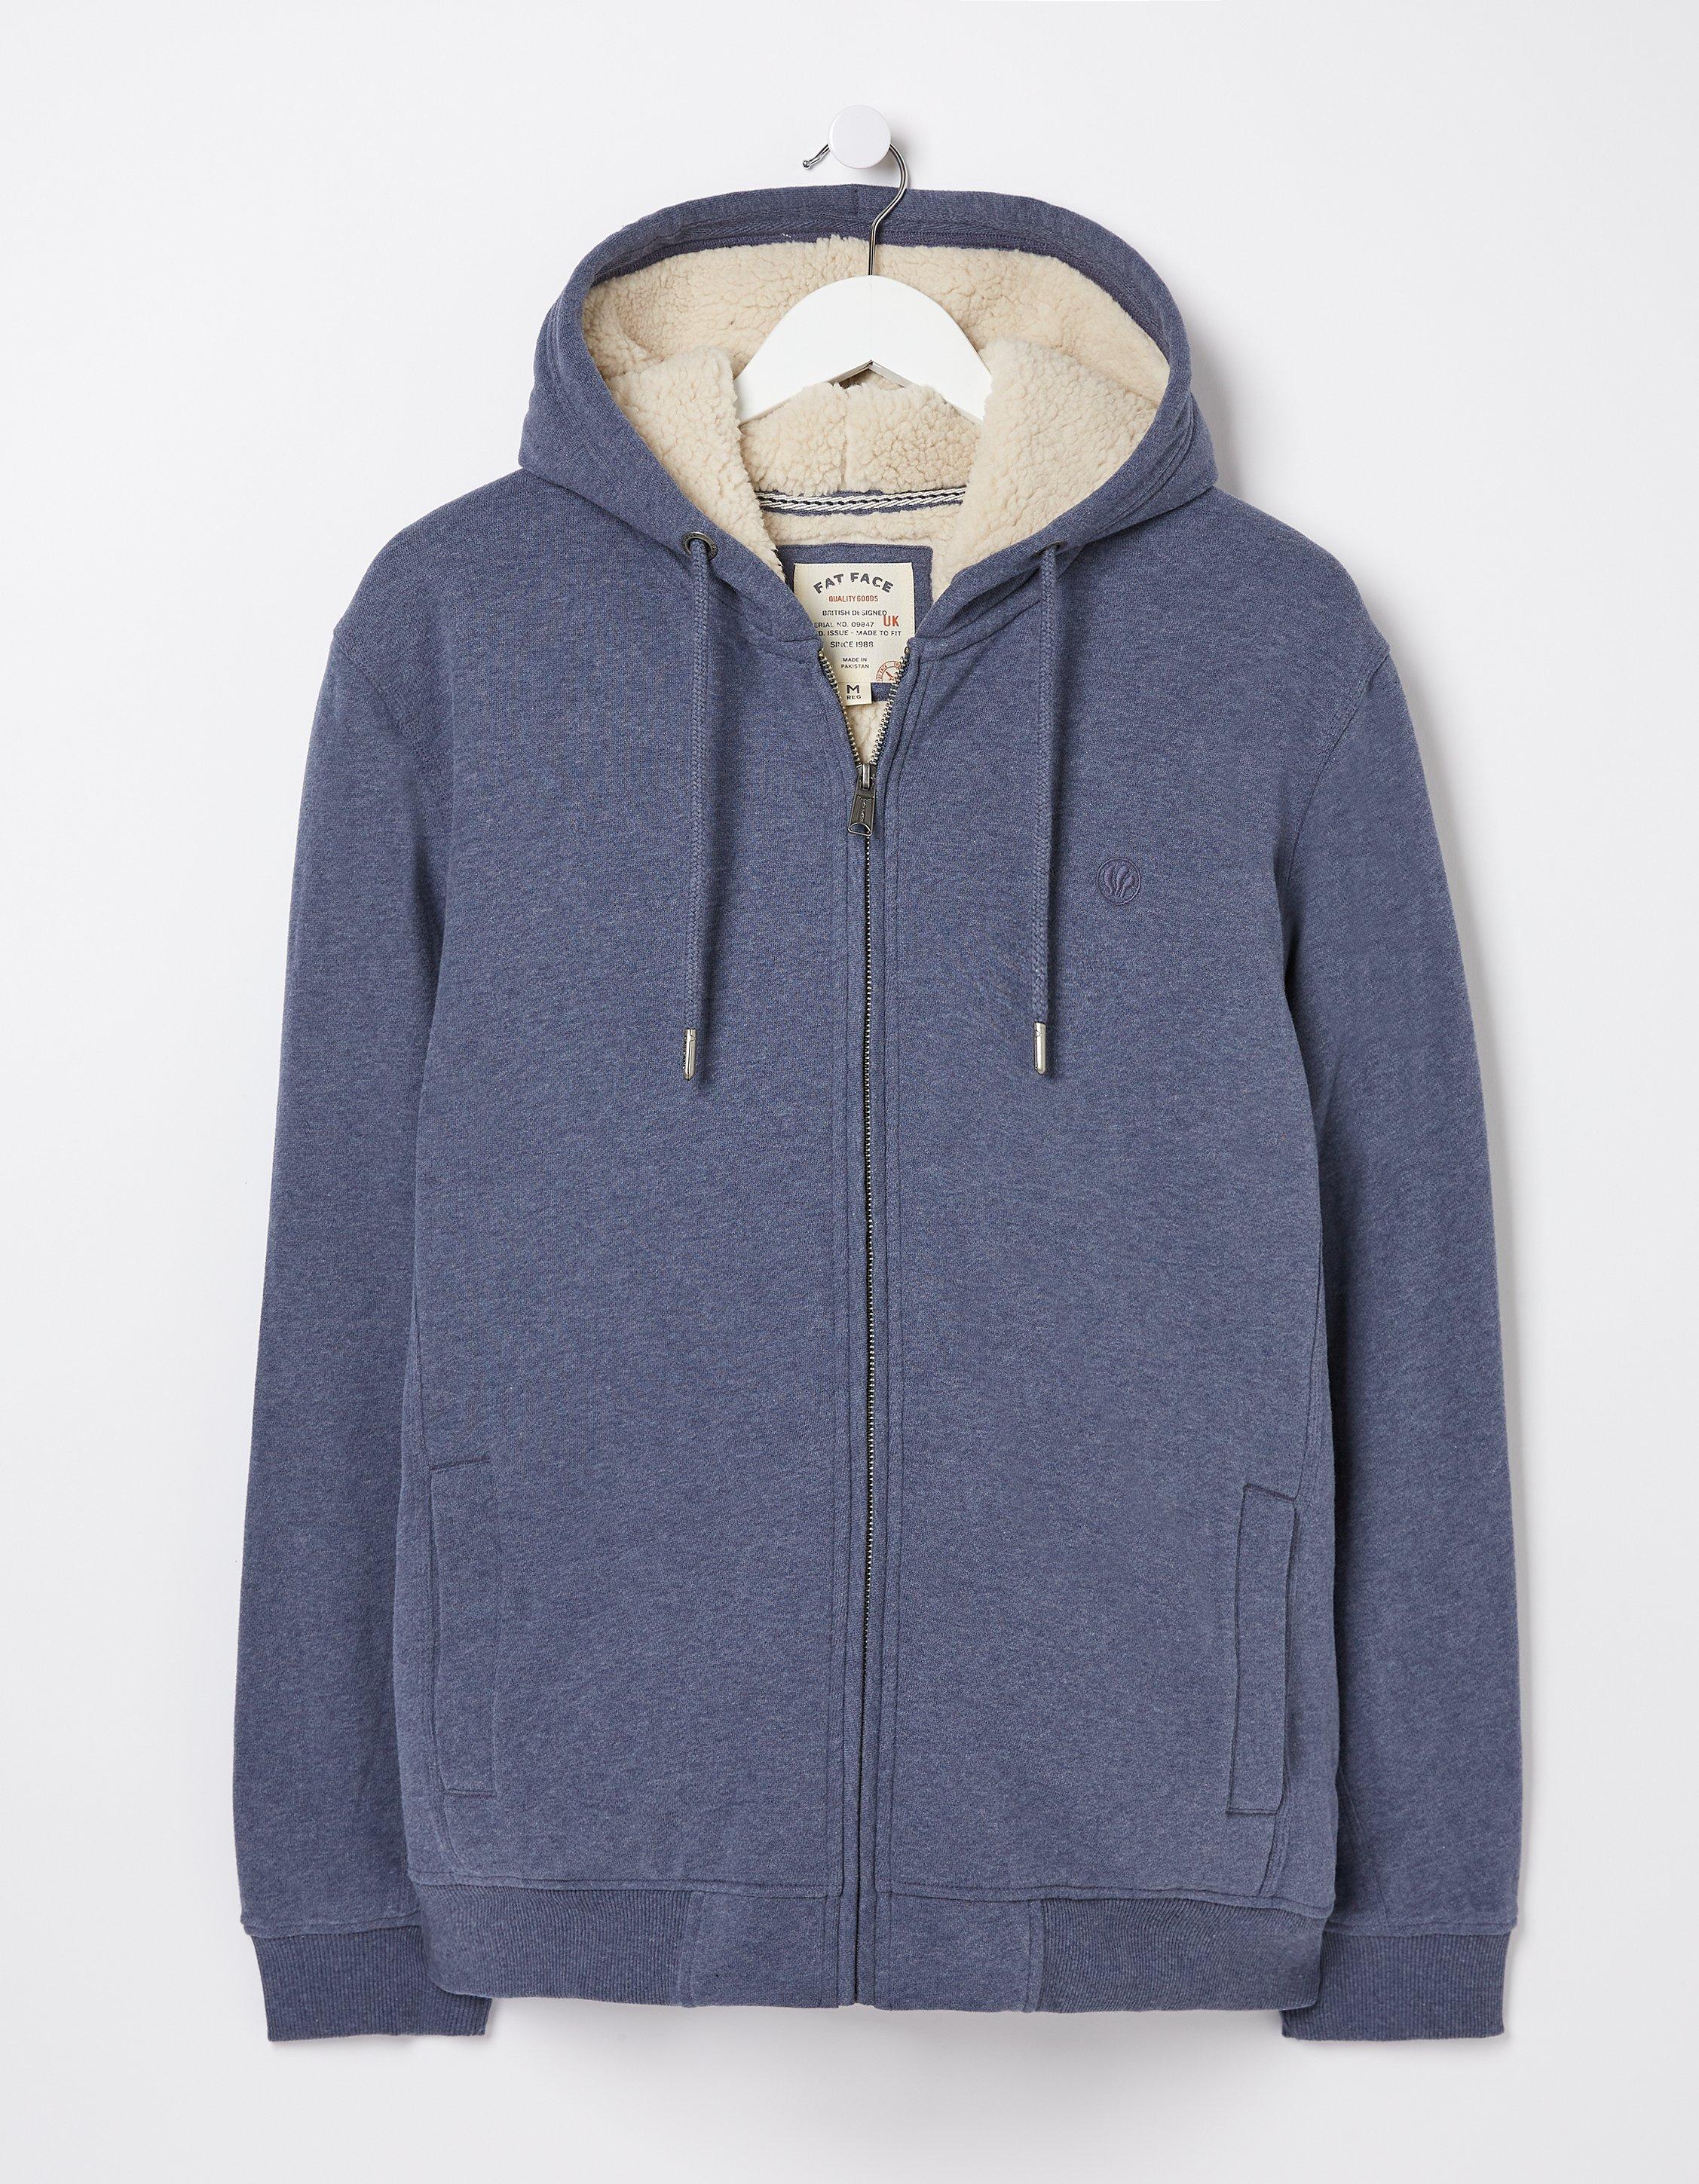 This Fleece-Lined Sweatshirt Is on Sale at